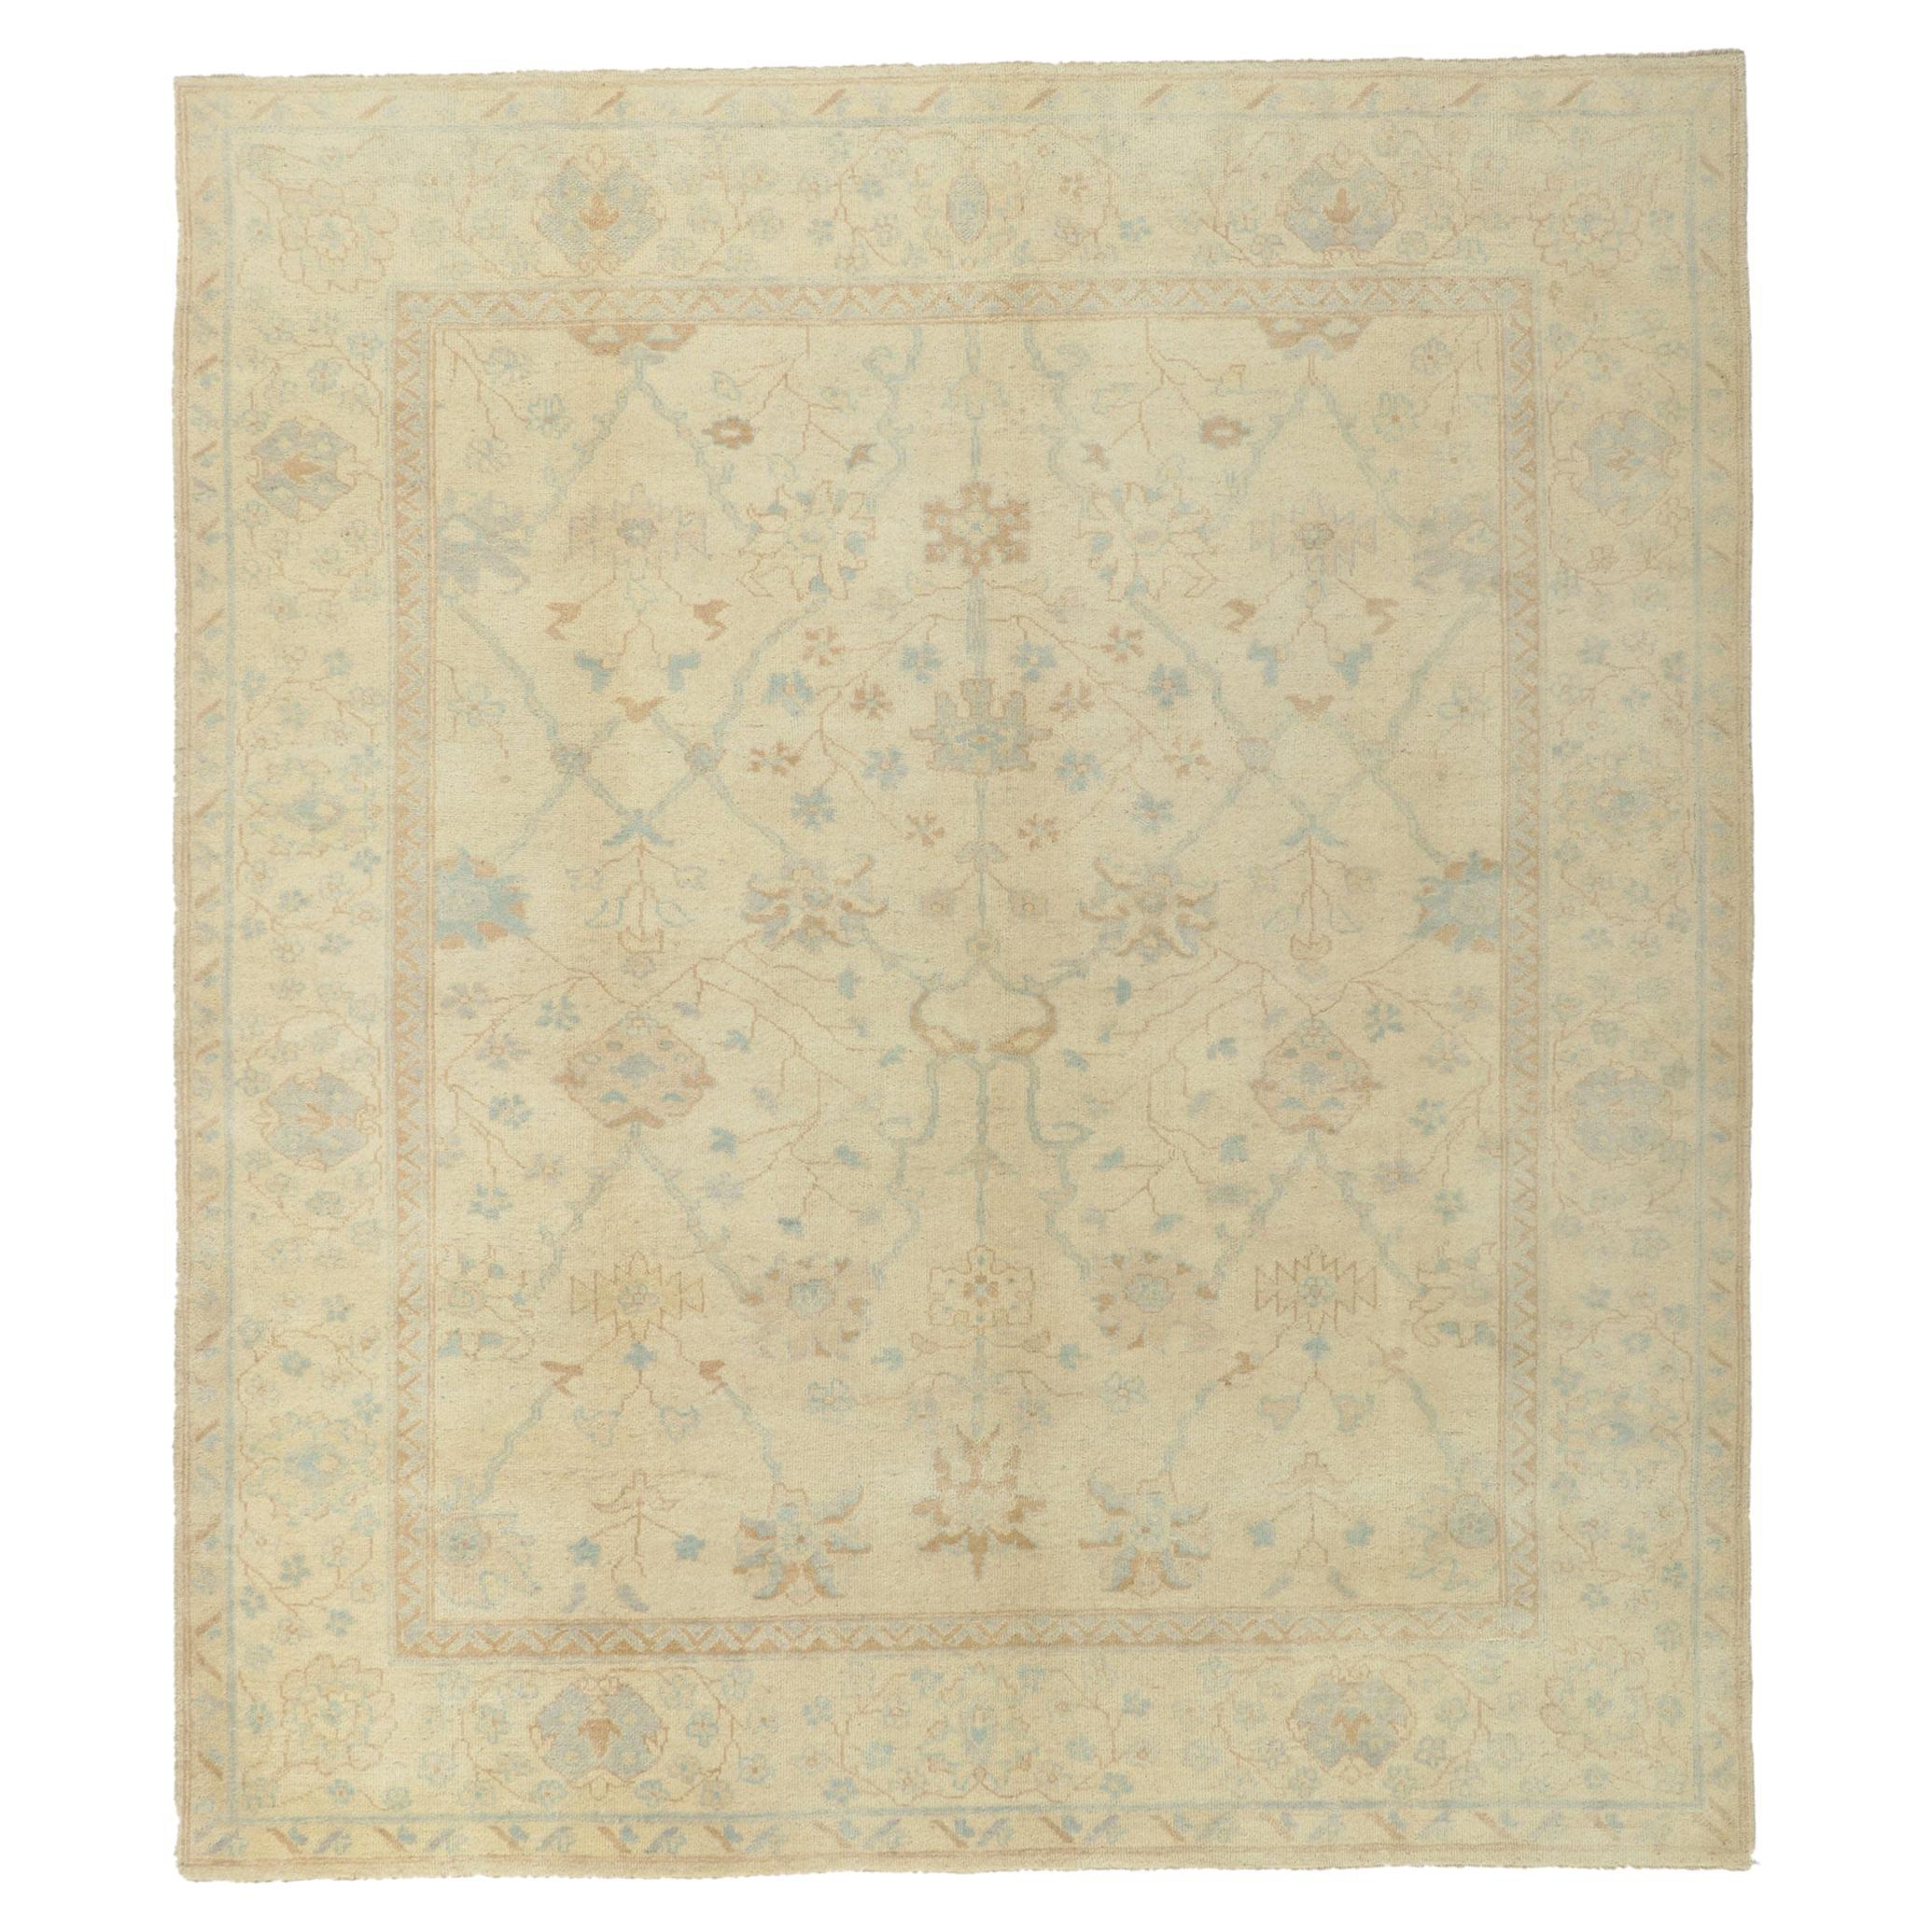 New Transitional Oushak Rug with Soft Earth-Tone Colors